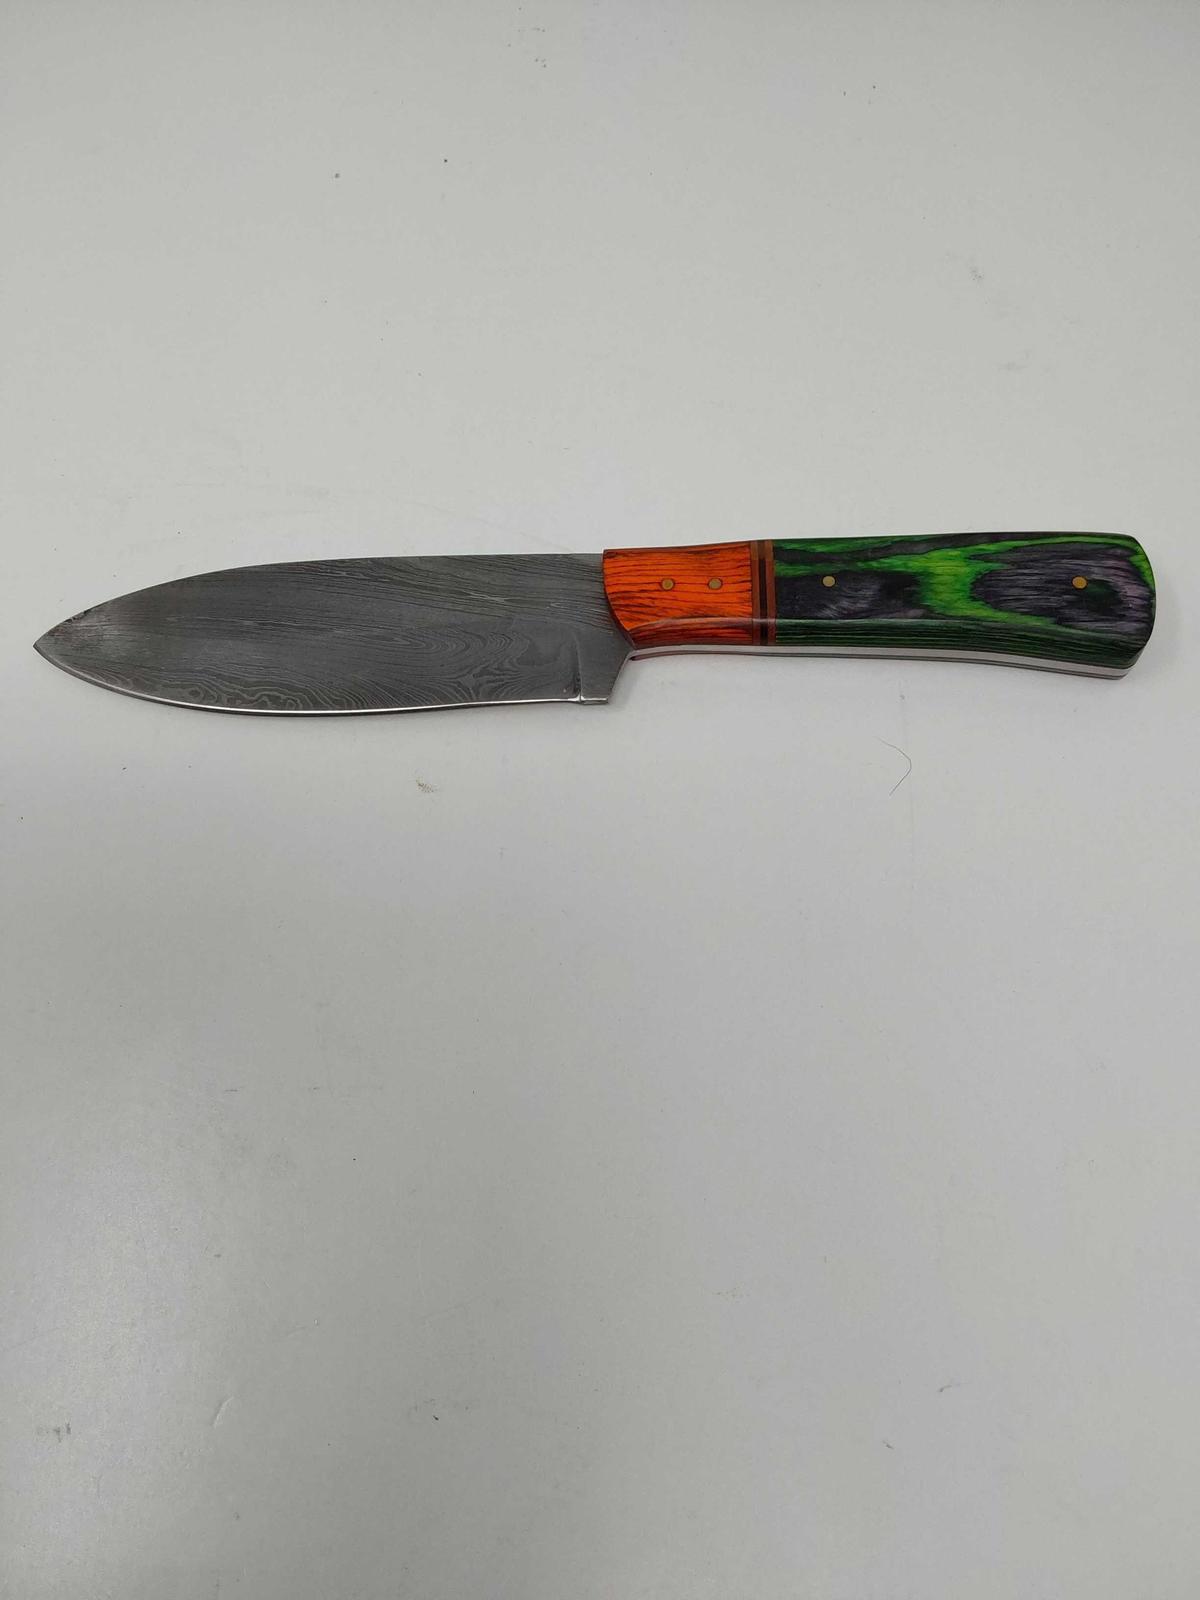 Blade Style: Drop Point ; Blade Length: 5.5 inches; Knife Length: 10 inches